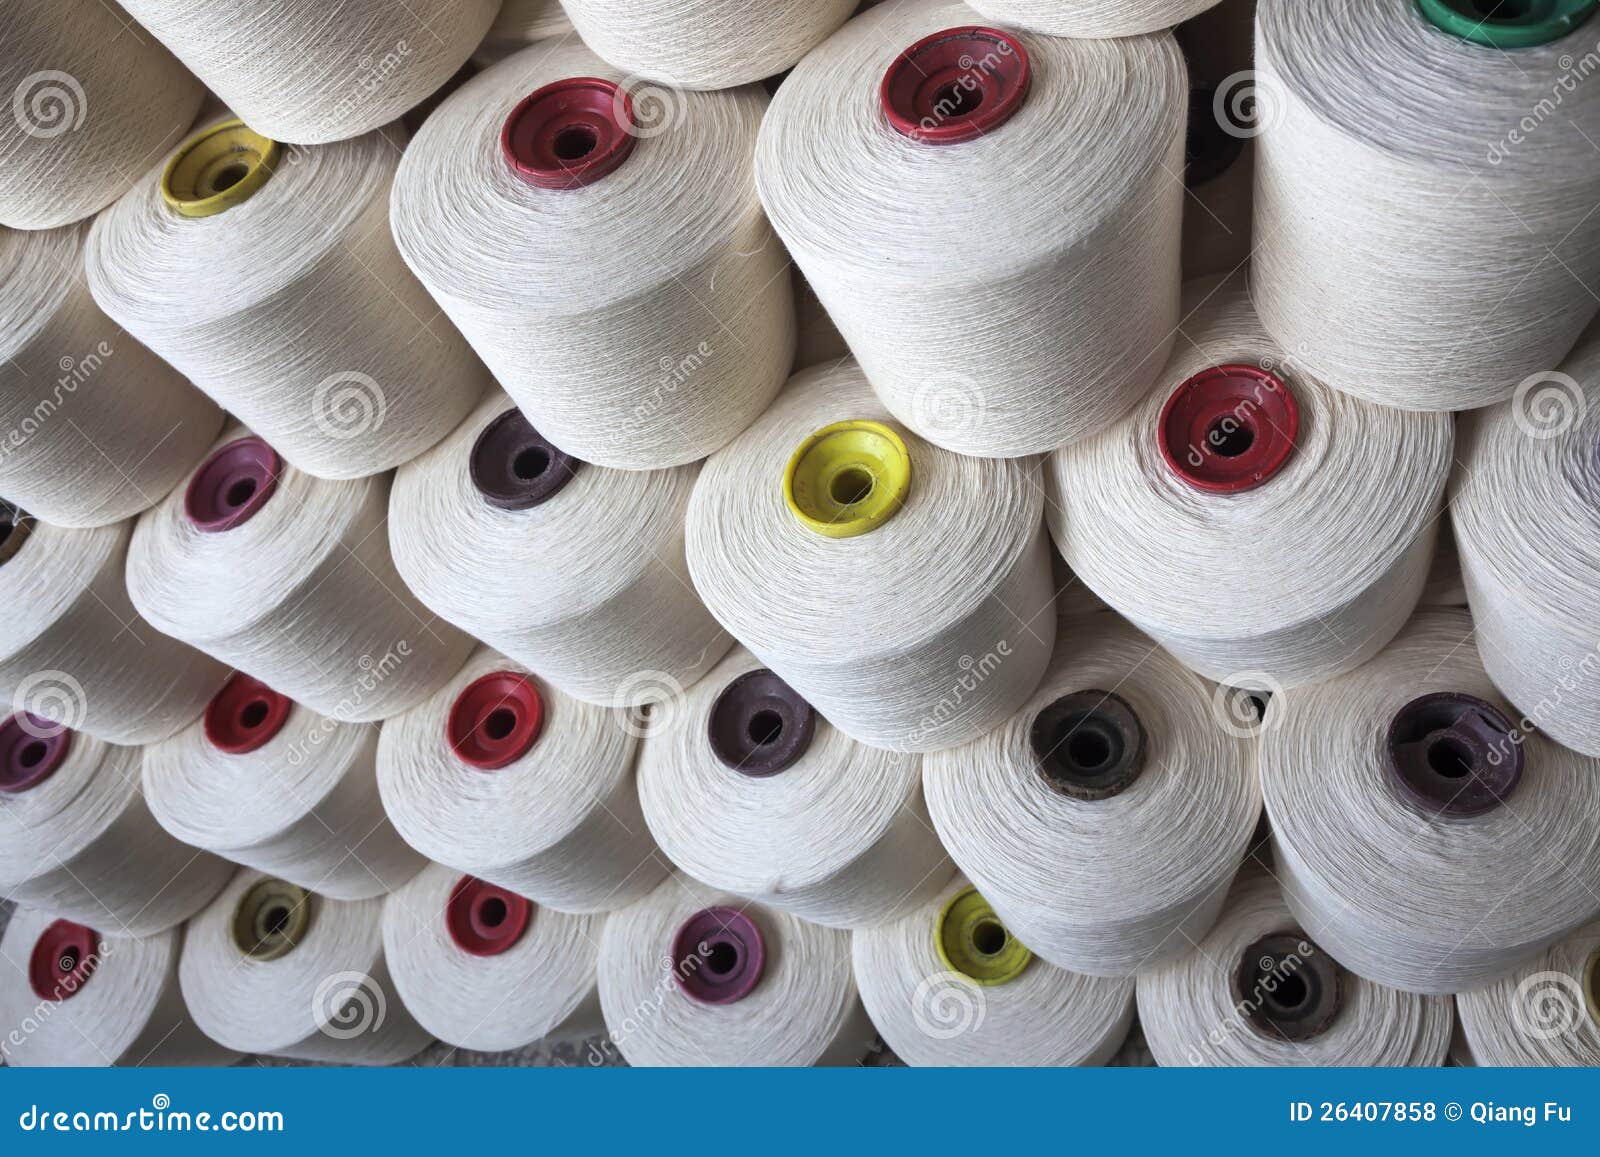 Cotton thread reel stock photo. Image of green, material - 26407858